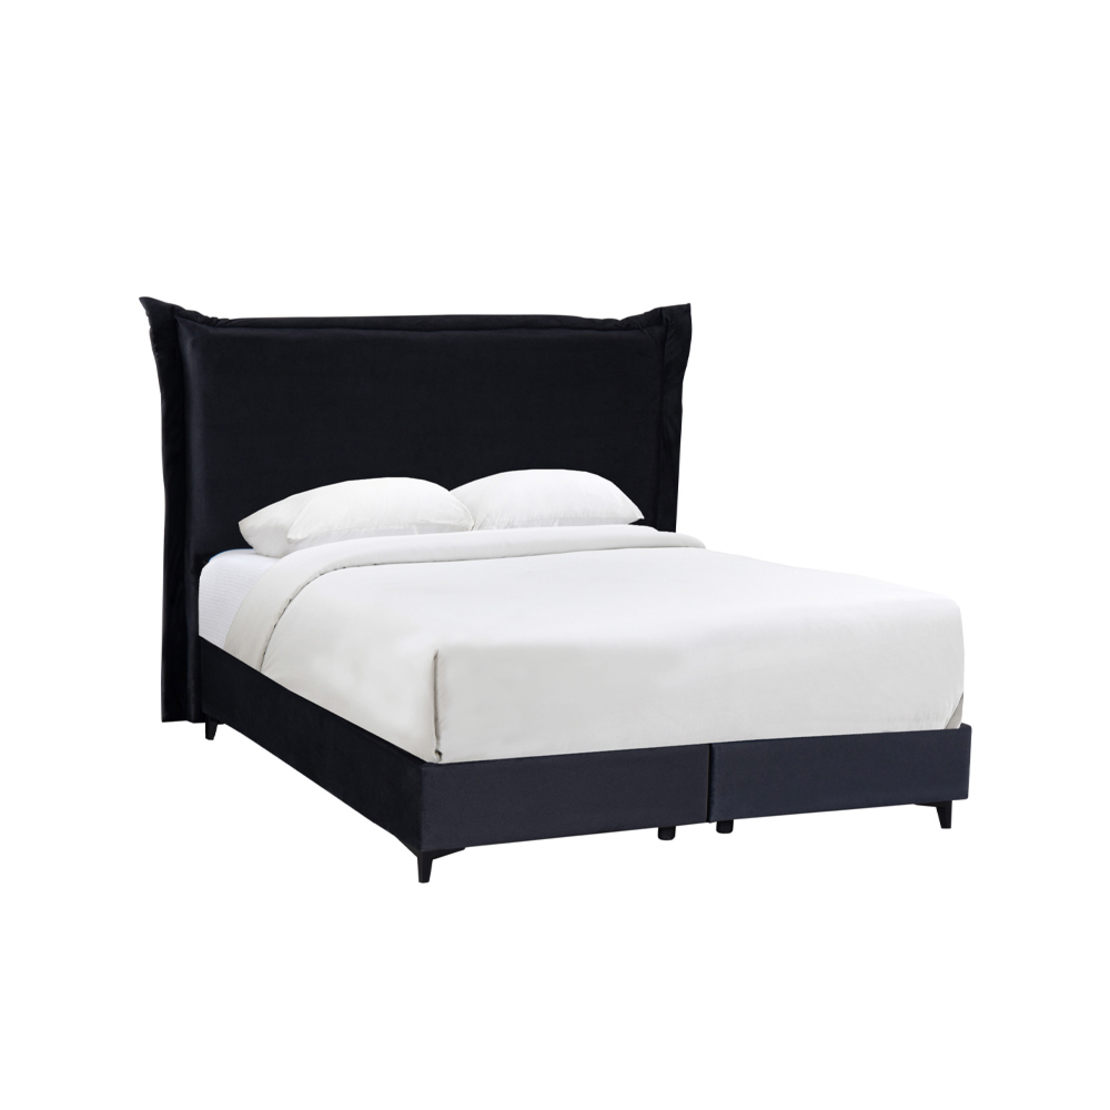 LONGWAVE BED WITH STORAGE (FOR MATTRESS 160x200cm)